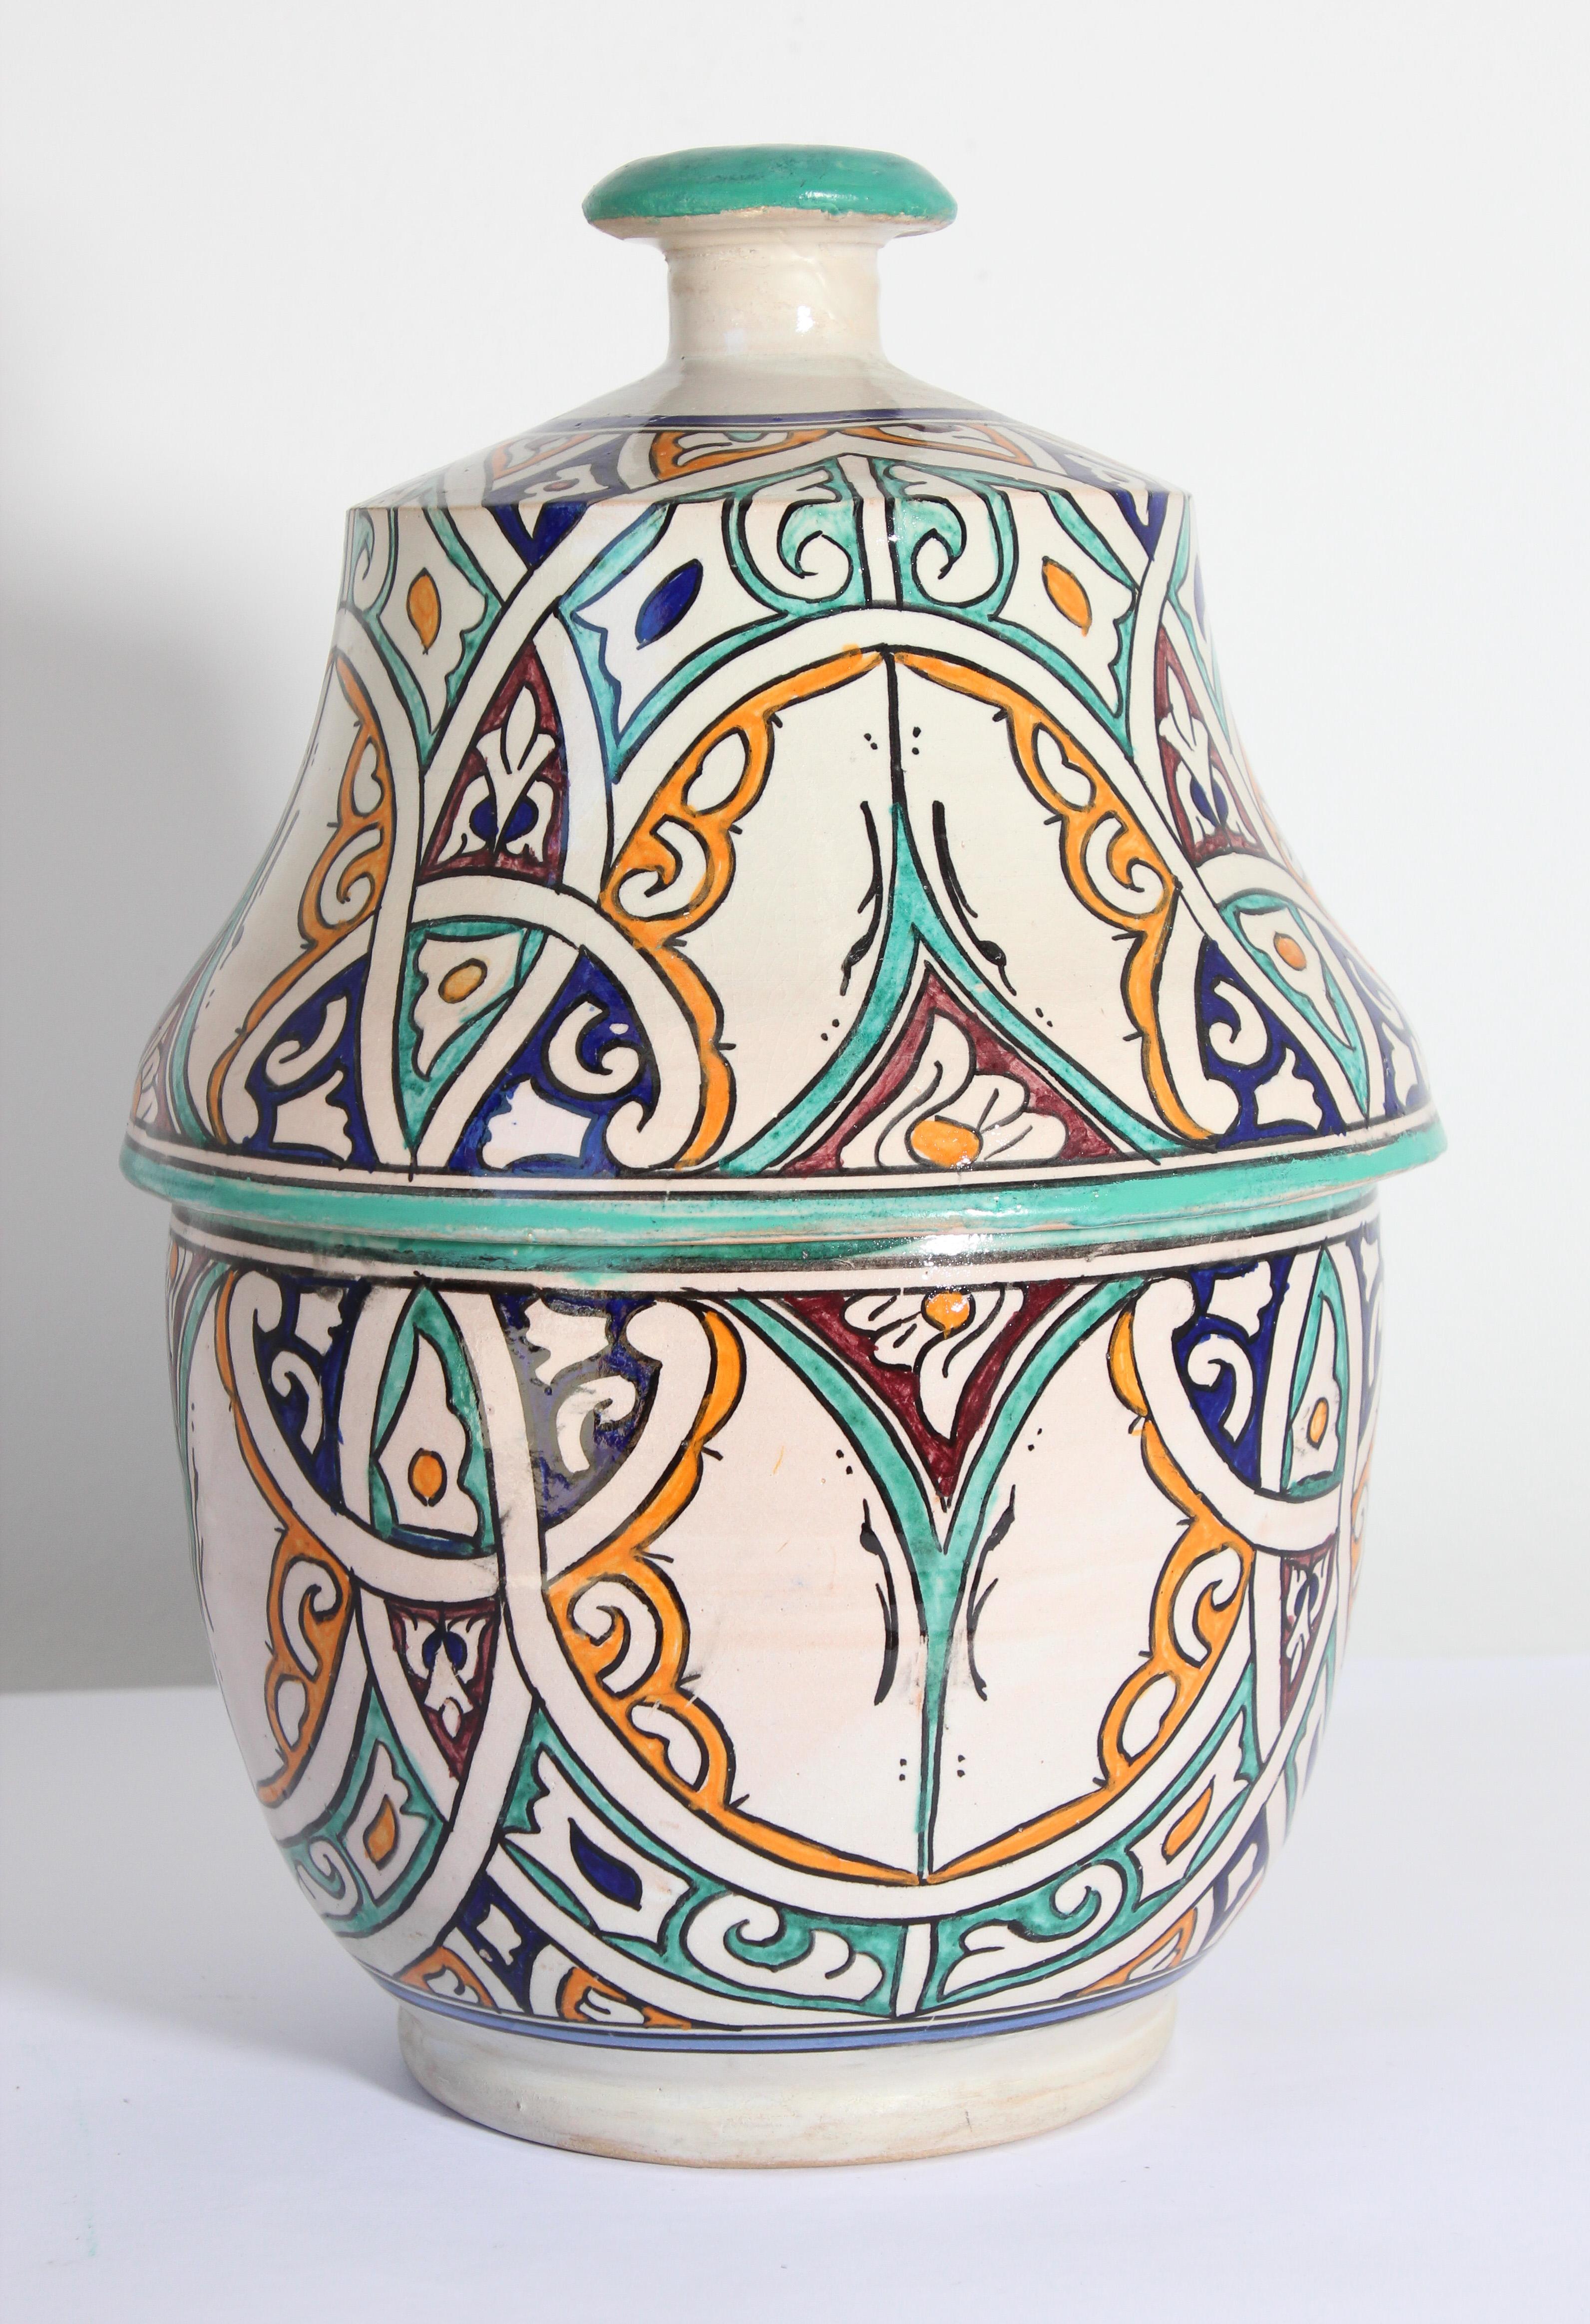 Hand-Crafted Moorish Ceramic Glazed Covered Jar Handcrafted in Fez Morocco